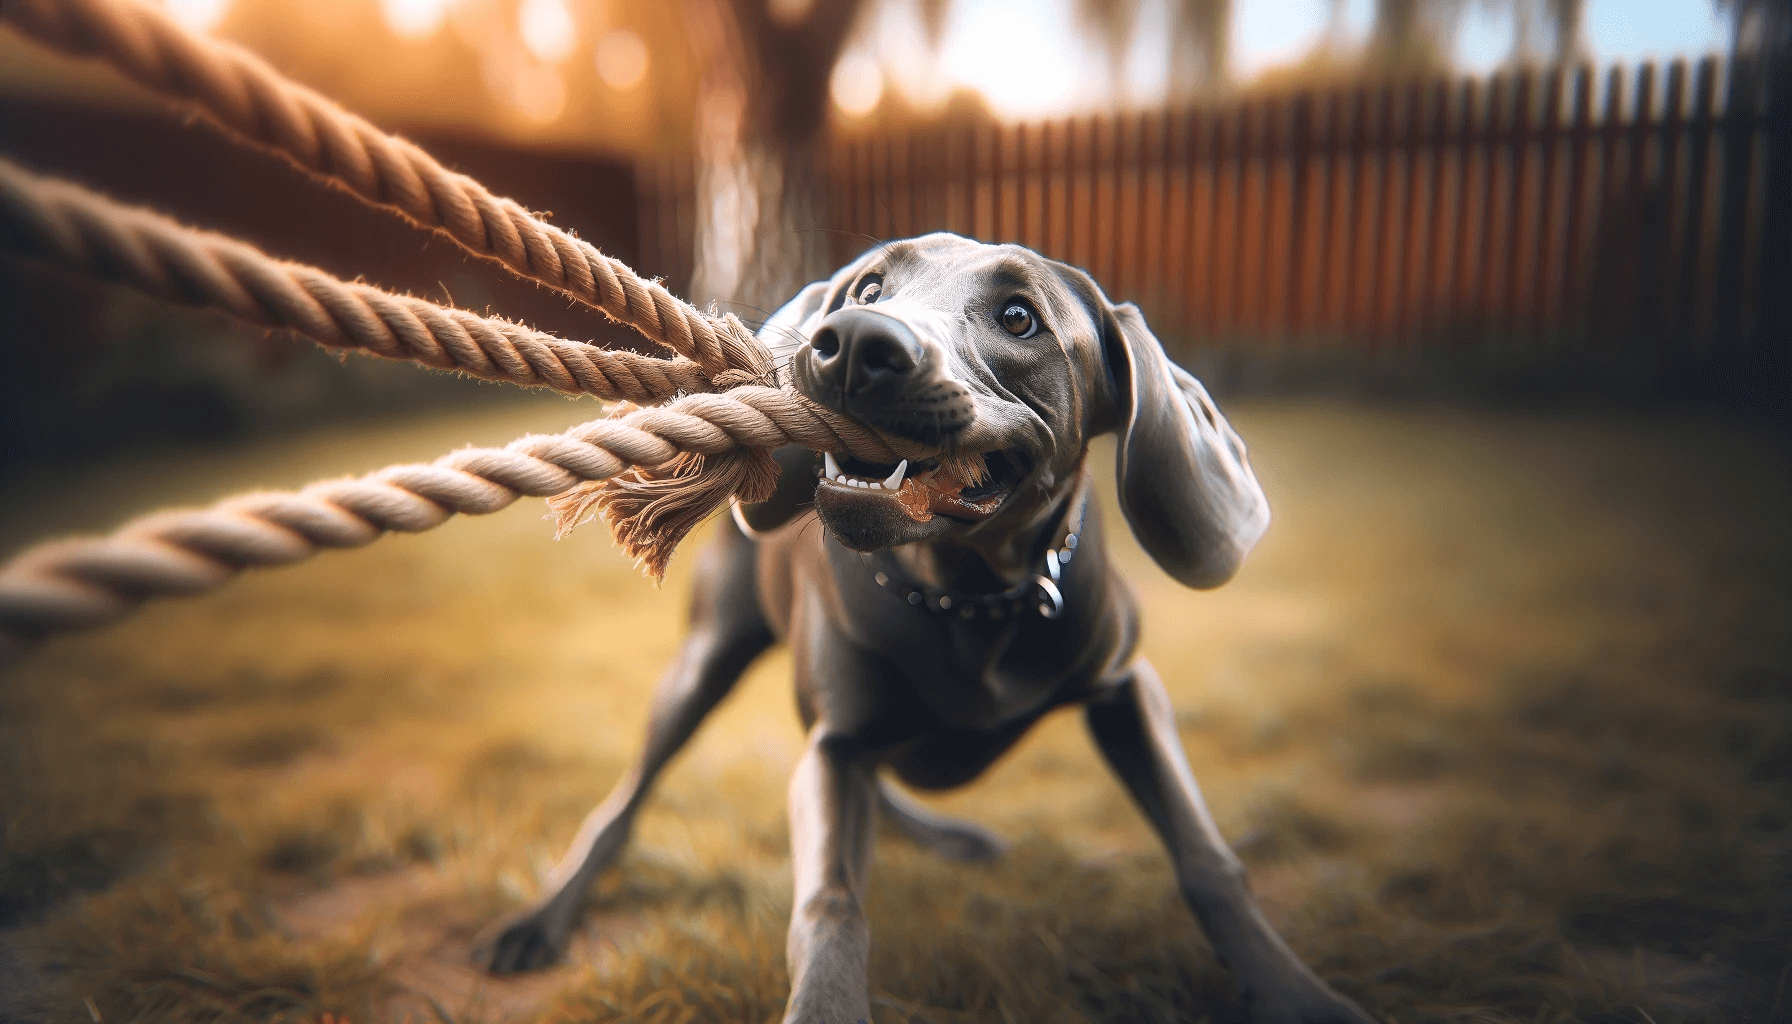 Greyador_s_playfulness_enjoying_a_game_of_tug-of-war_captured_in_a_lively_and_fun-filled_outdoor_scene